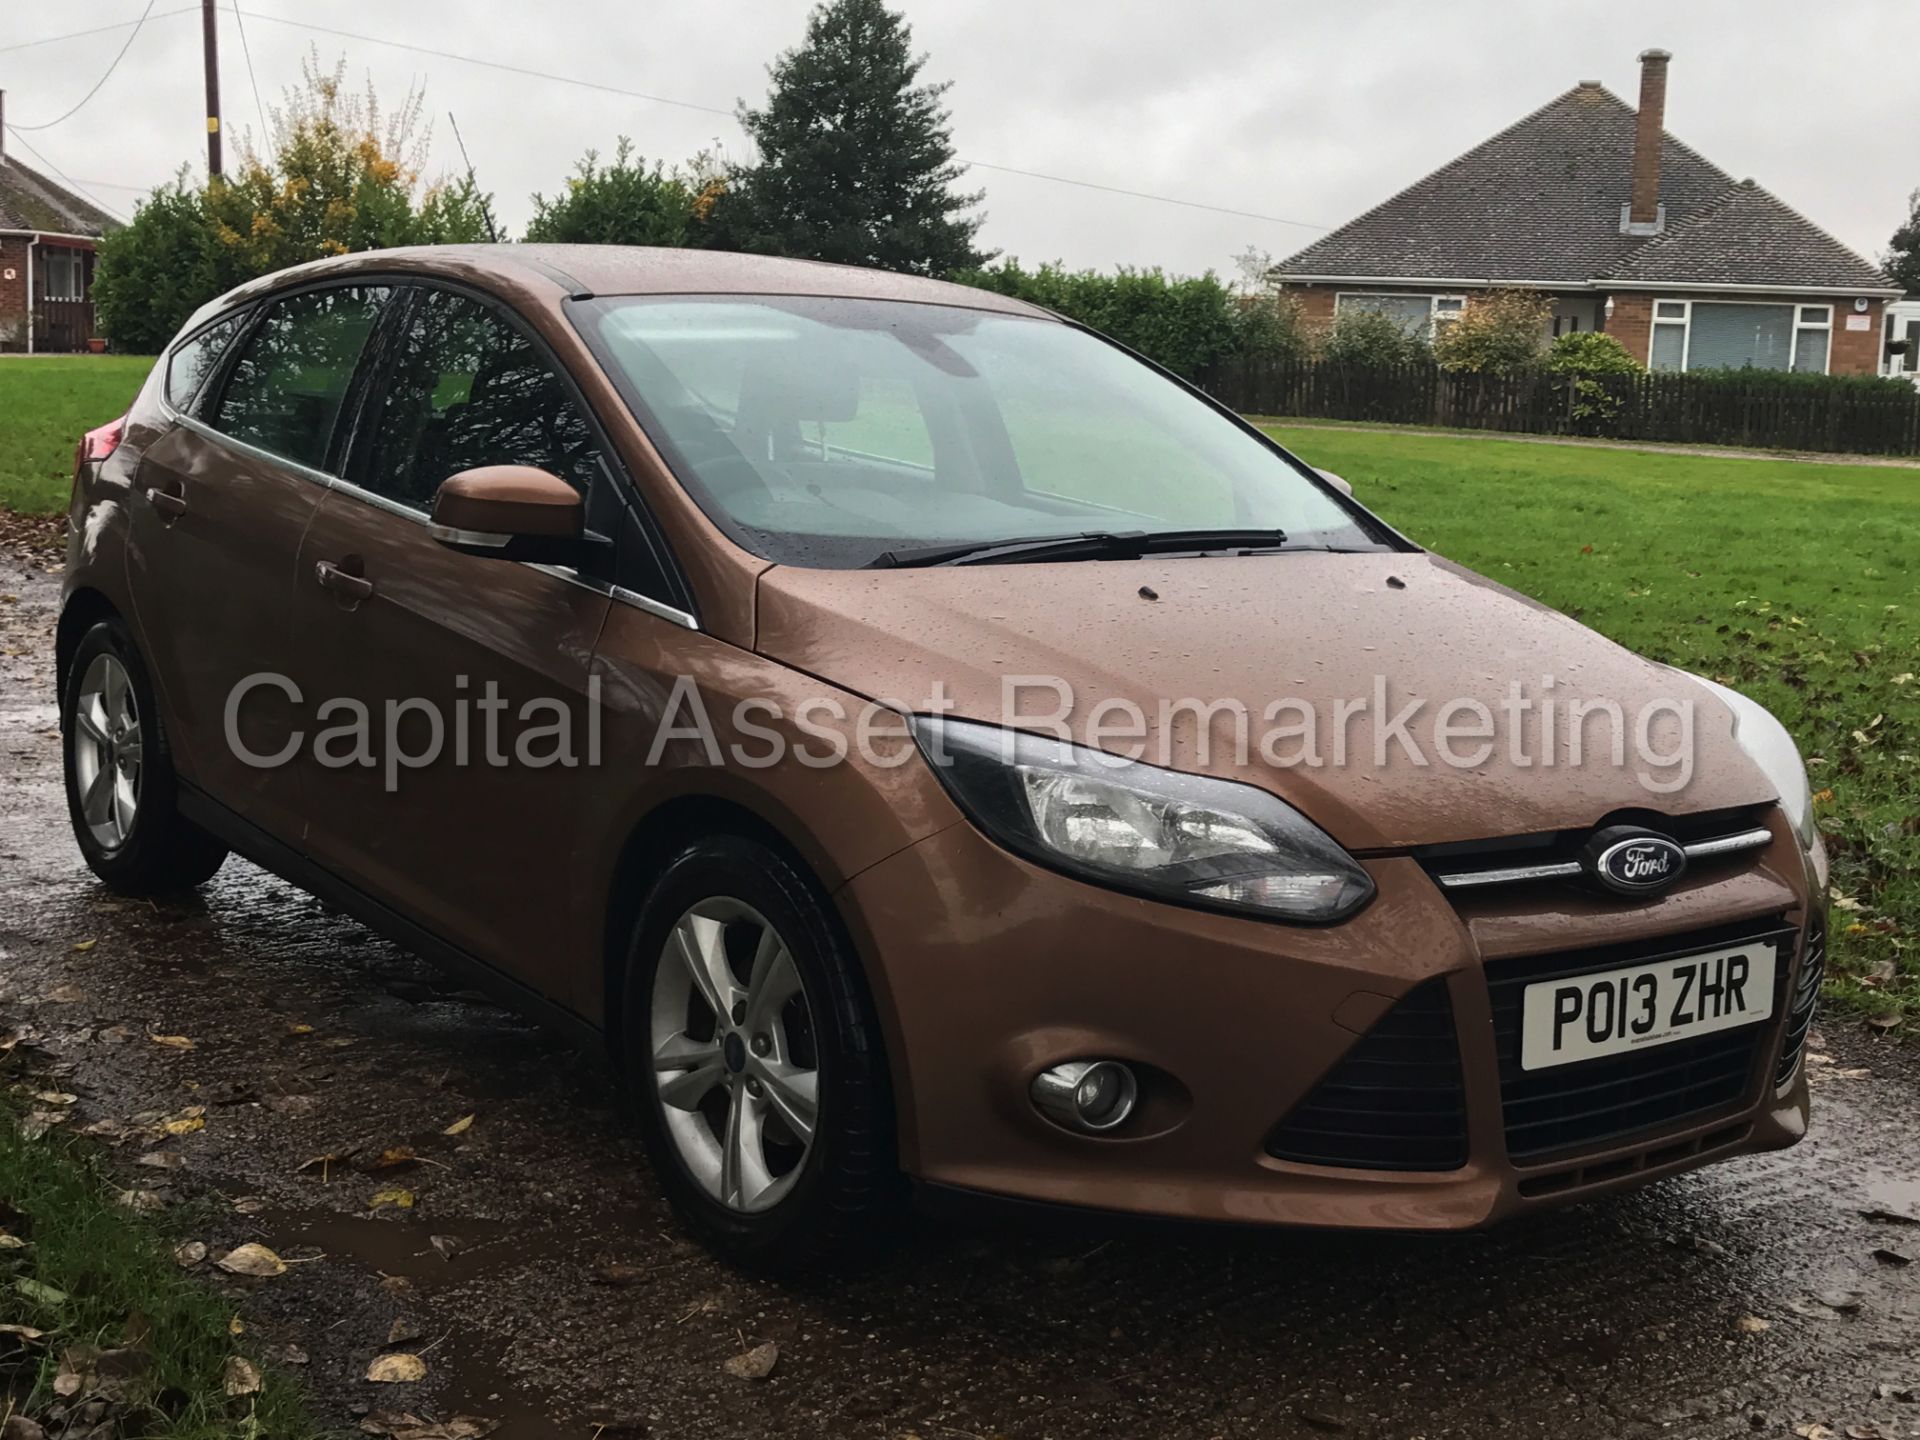 (On Sale) FORD FOCUS 'ZETEC' (2013 - 13 REG) '1.6 TDCI - 6 SPEED - STOP / START - AIR CON - 65 MPG+ - Image 6 of 24